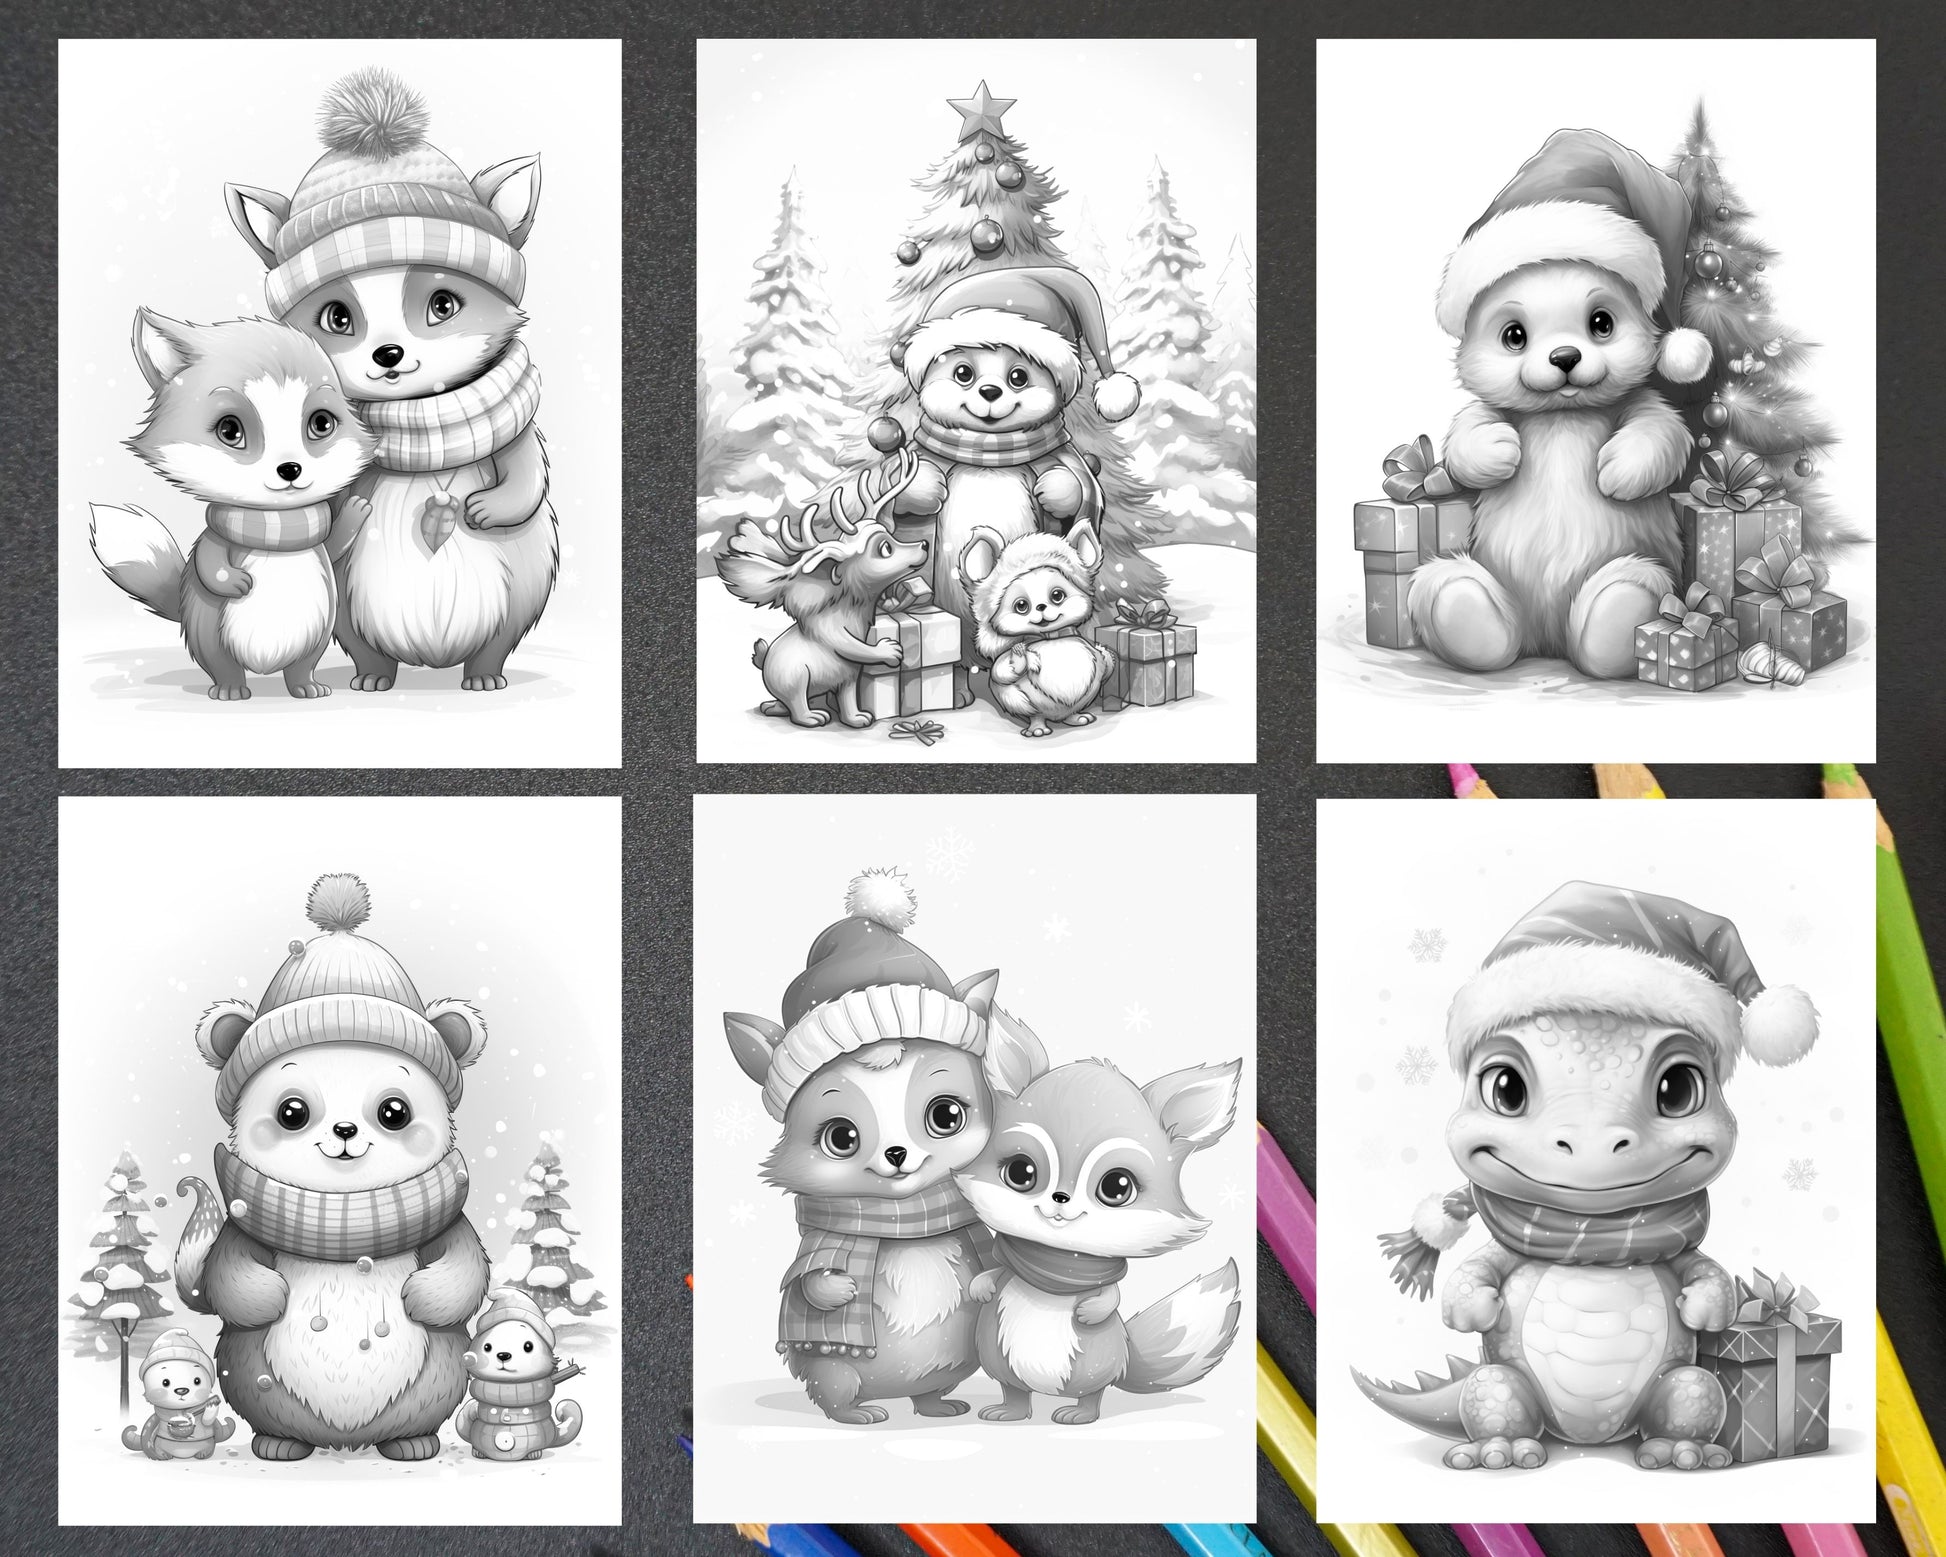 Christmas Critters Coloring Pages, Grayscale Coloring Printables, Adult and Kids Coloring Sheets, Holiday DIY Crafts, Festive Animals, Winter Relaxation Coloring, Xmas Stress-Relief Coloring, Printable Seasonal Decorations, Cute Christmas Creatures, Family Coloring Fun, Christmas Coloring Sheets, Winter Coloring Pages, Holiday Coloring Pages, Xmas Coloring Pages